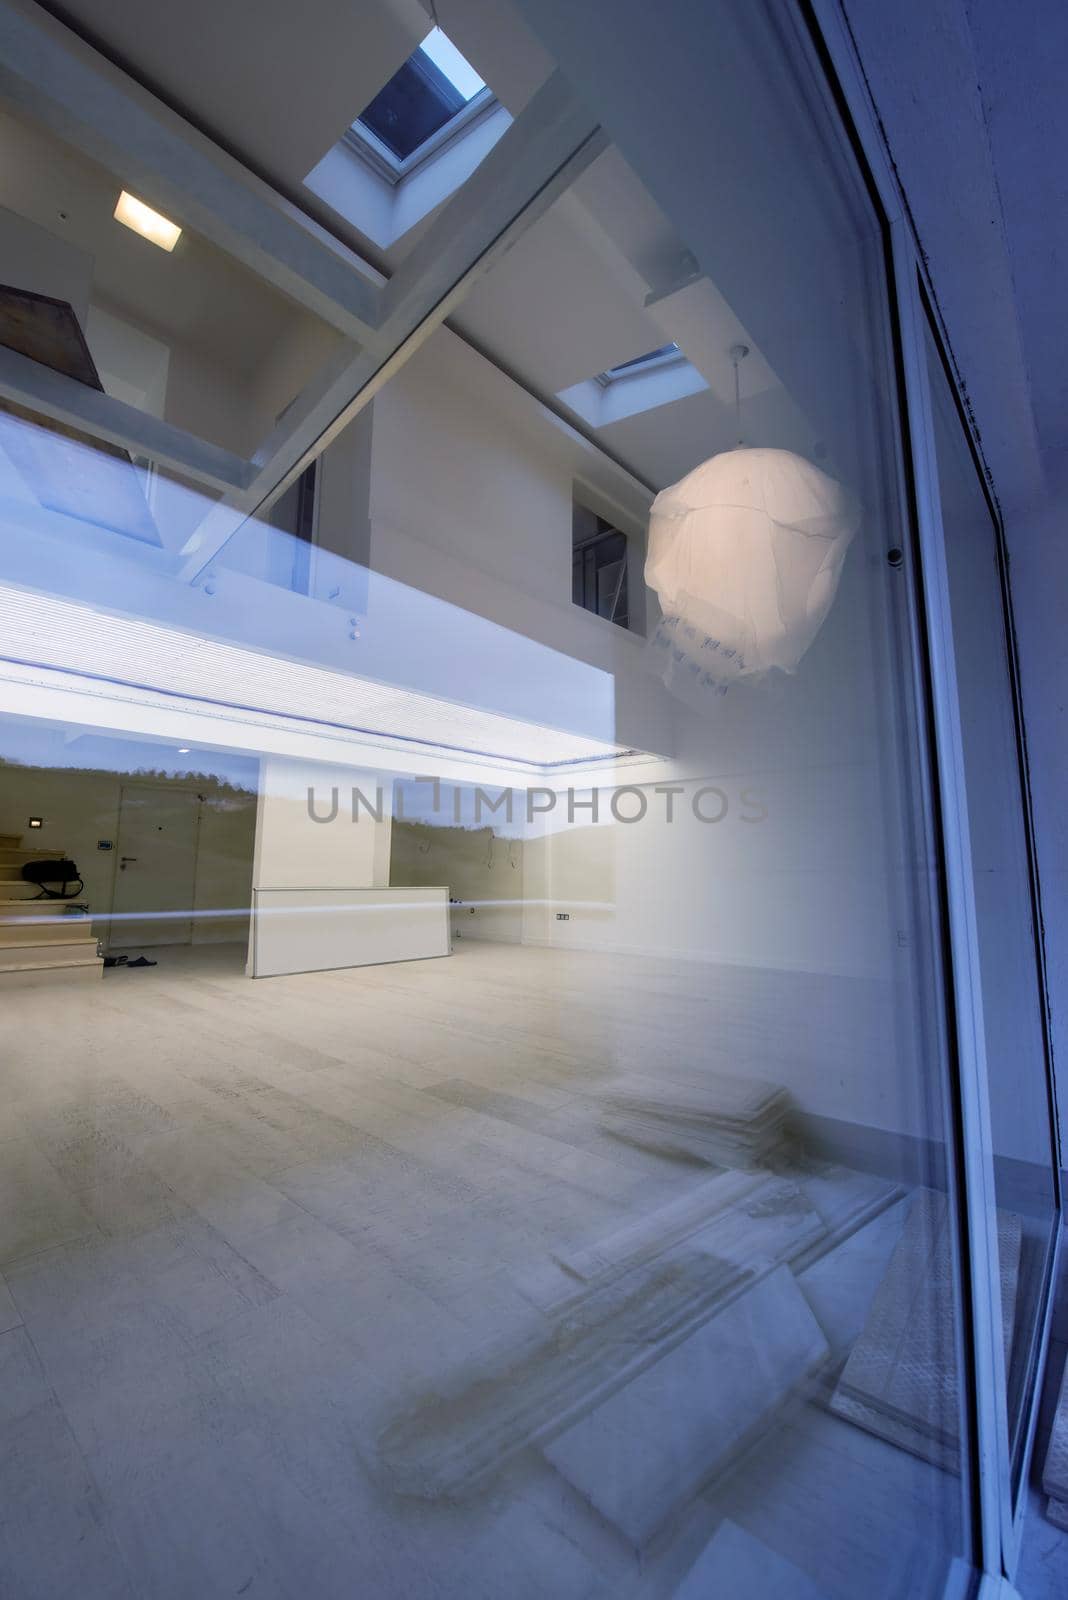 outside view trough window on interior of a luxury stylish modern open space design two level apartment with white walls